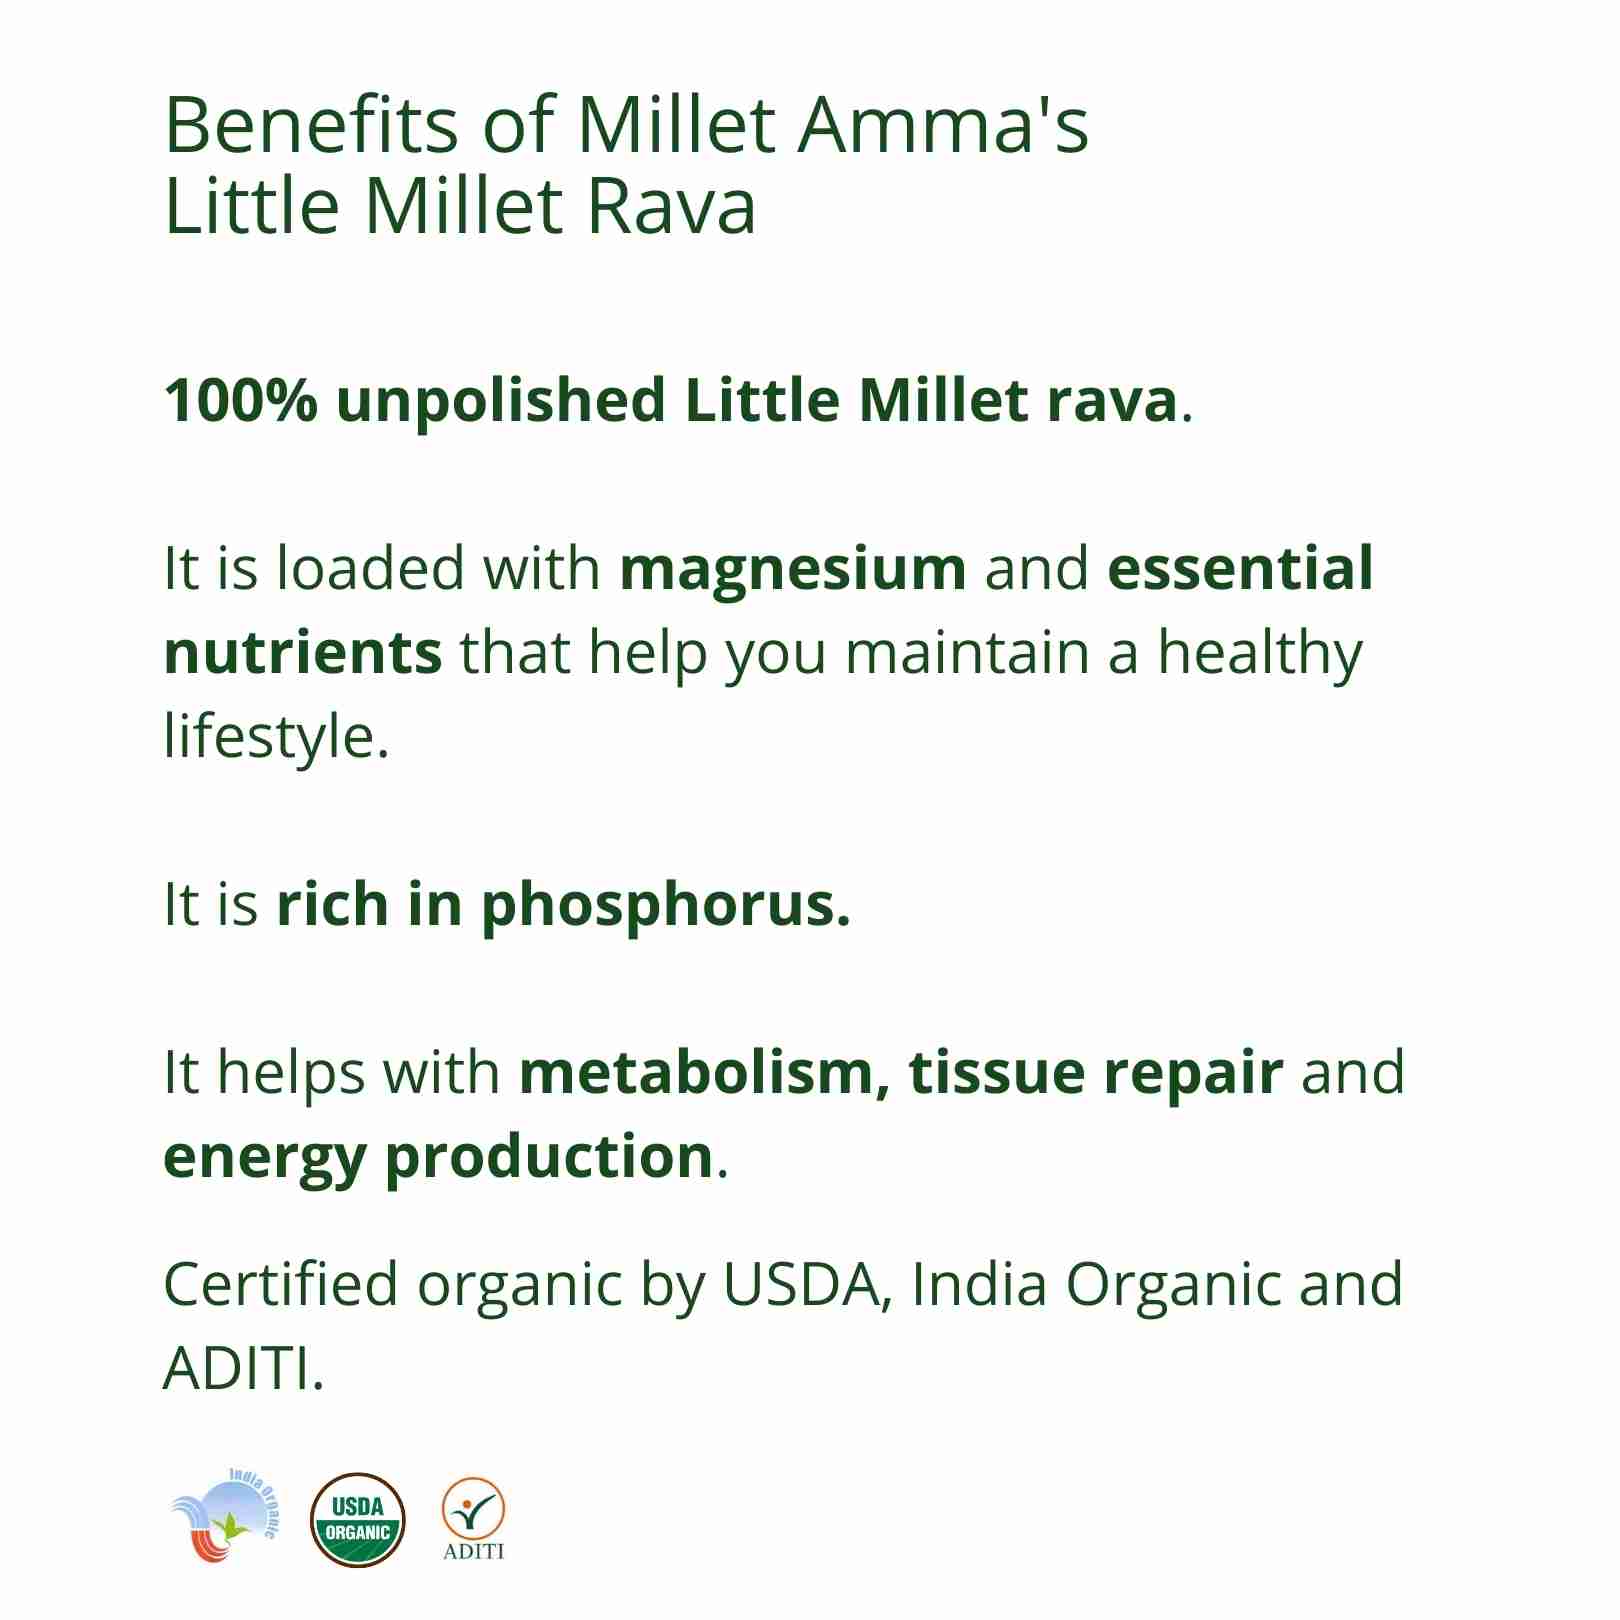 Millet Amma’s Organic Little Millet Rava-  Millet Amma’s Organic Little Millet Rava is made with unpolished Little Millets.    Little millet is rich in minerals like iron, zinc and calcium and is also high in fiber and aids in weight management.   You can make a variety of gluten free dishes with our Little Millet rava like upma, kheer, porridge, crackers, rava dosa and idli.